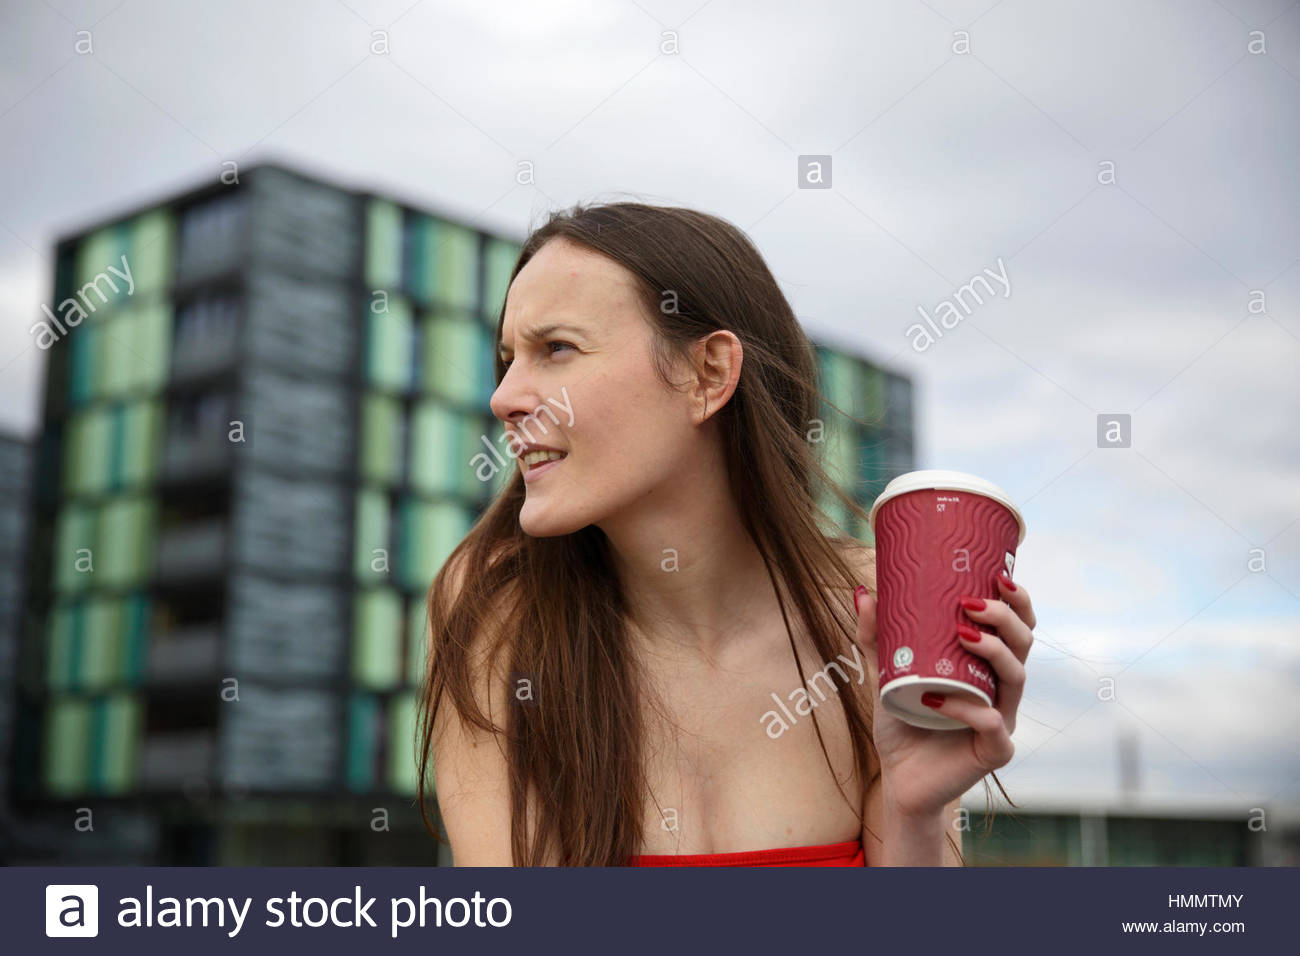 Woman drinking coffee in an urban environment Stock Photo